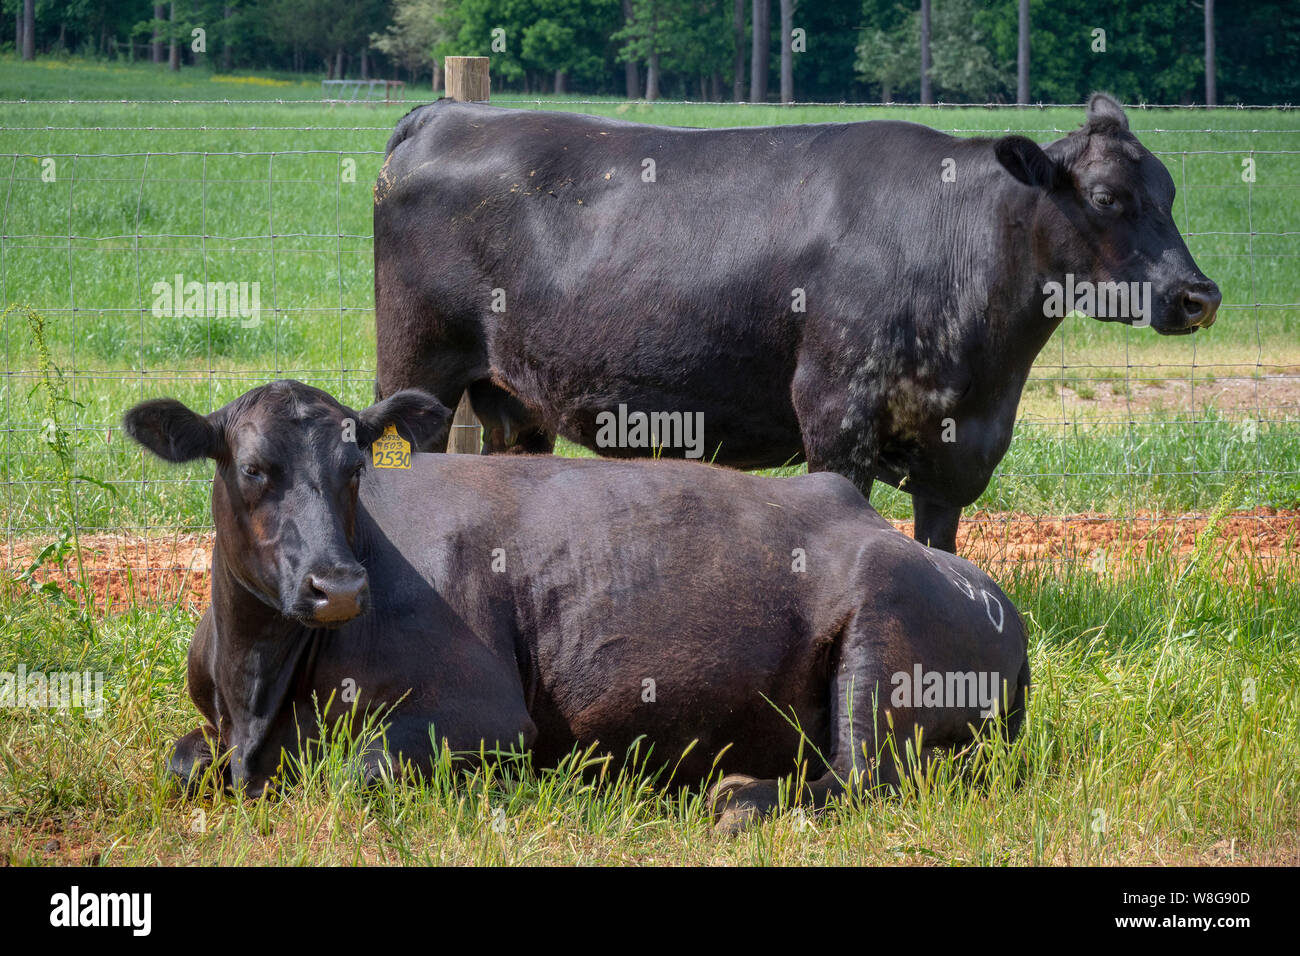 Black angus cattle relaxing on a Georgia farm Stock Photo